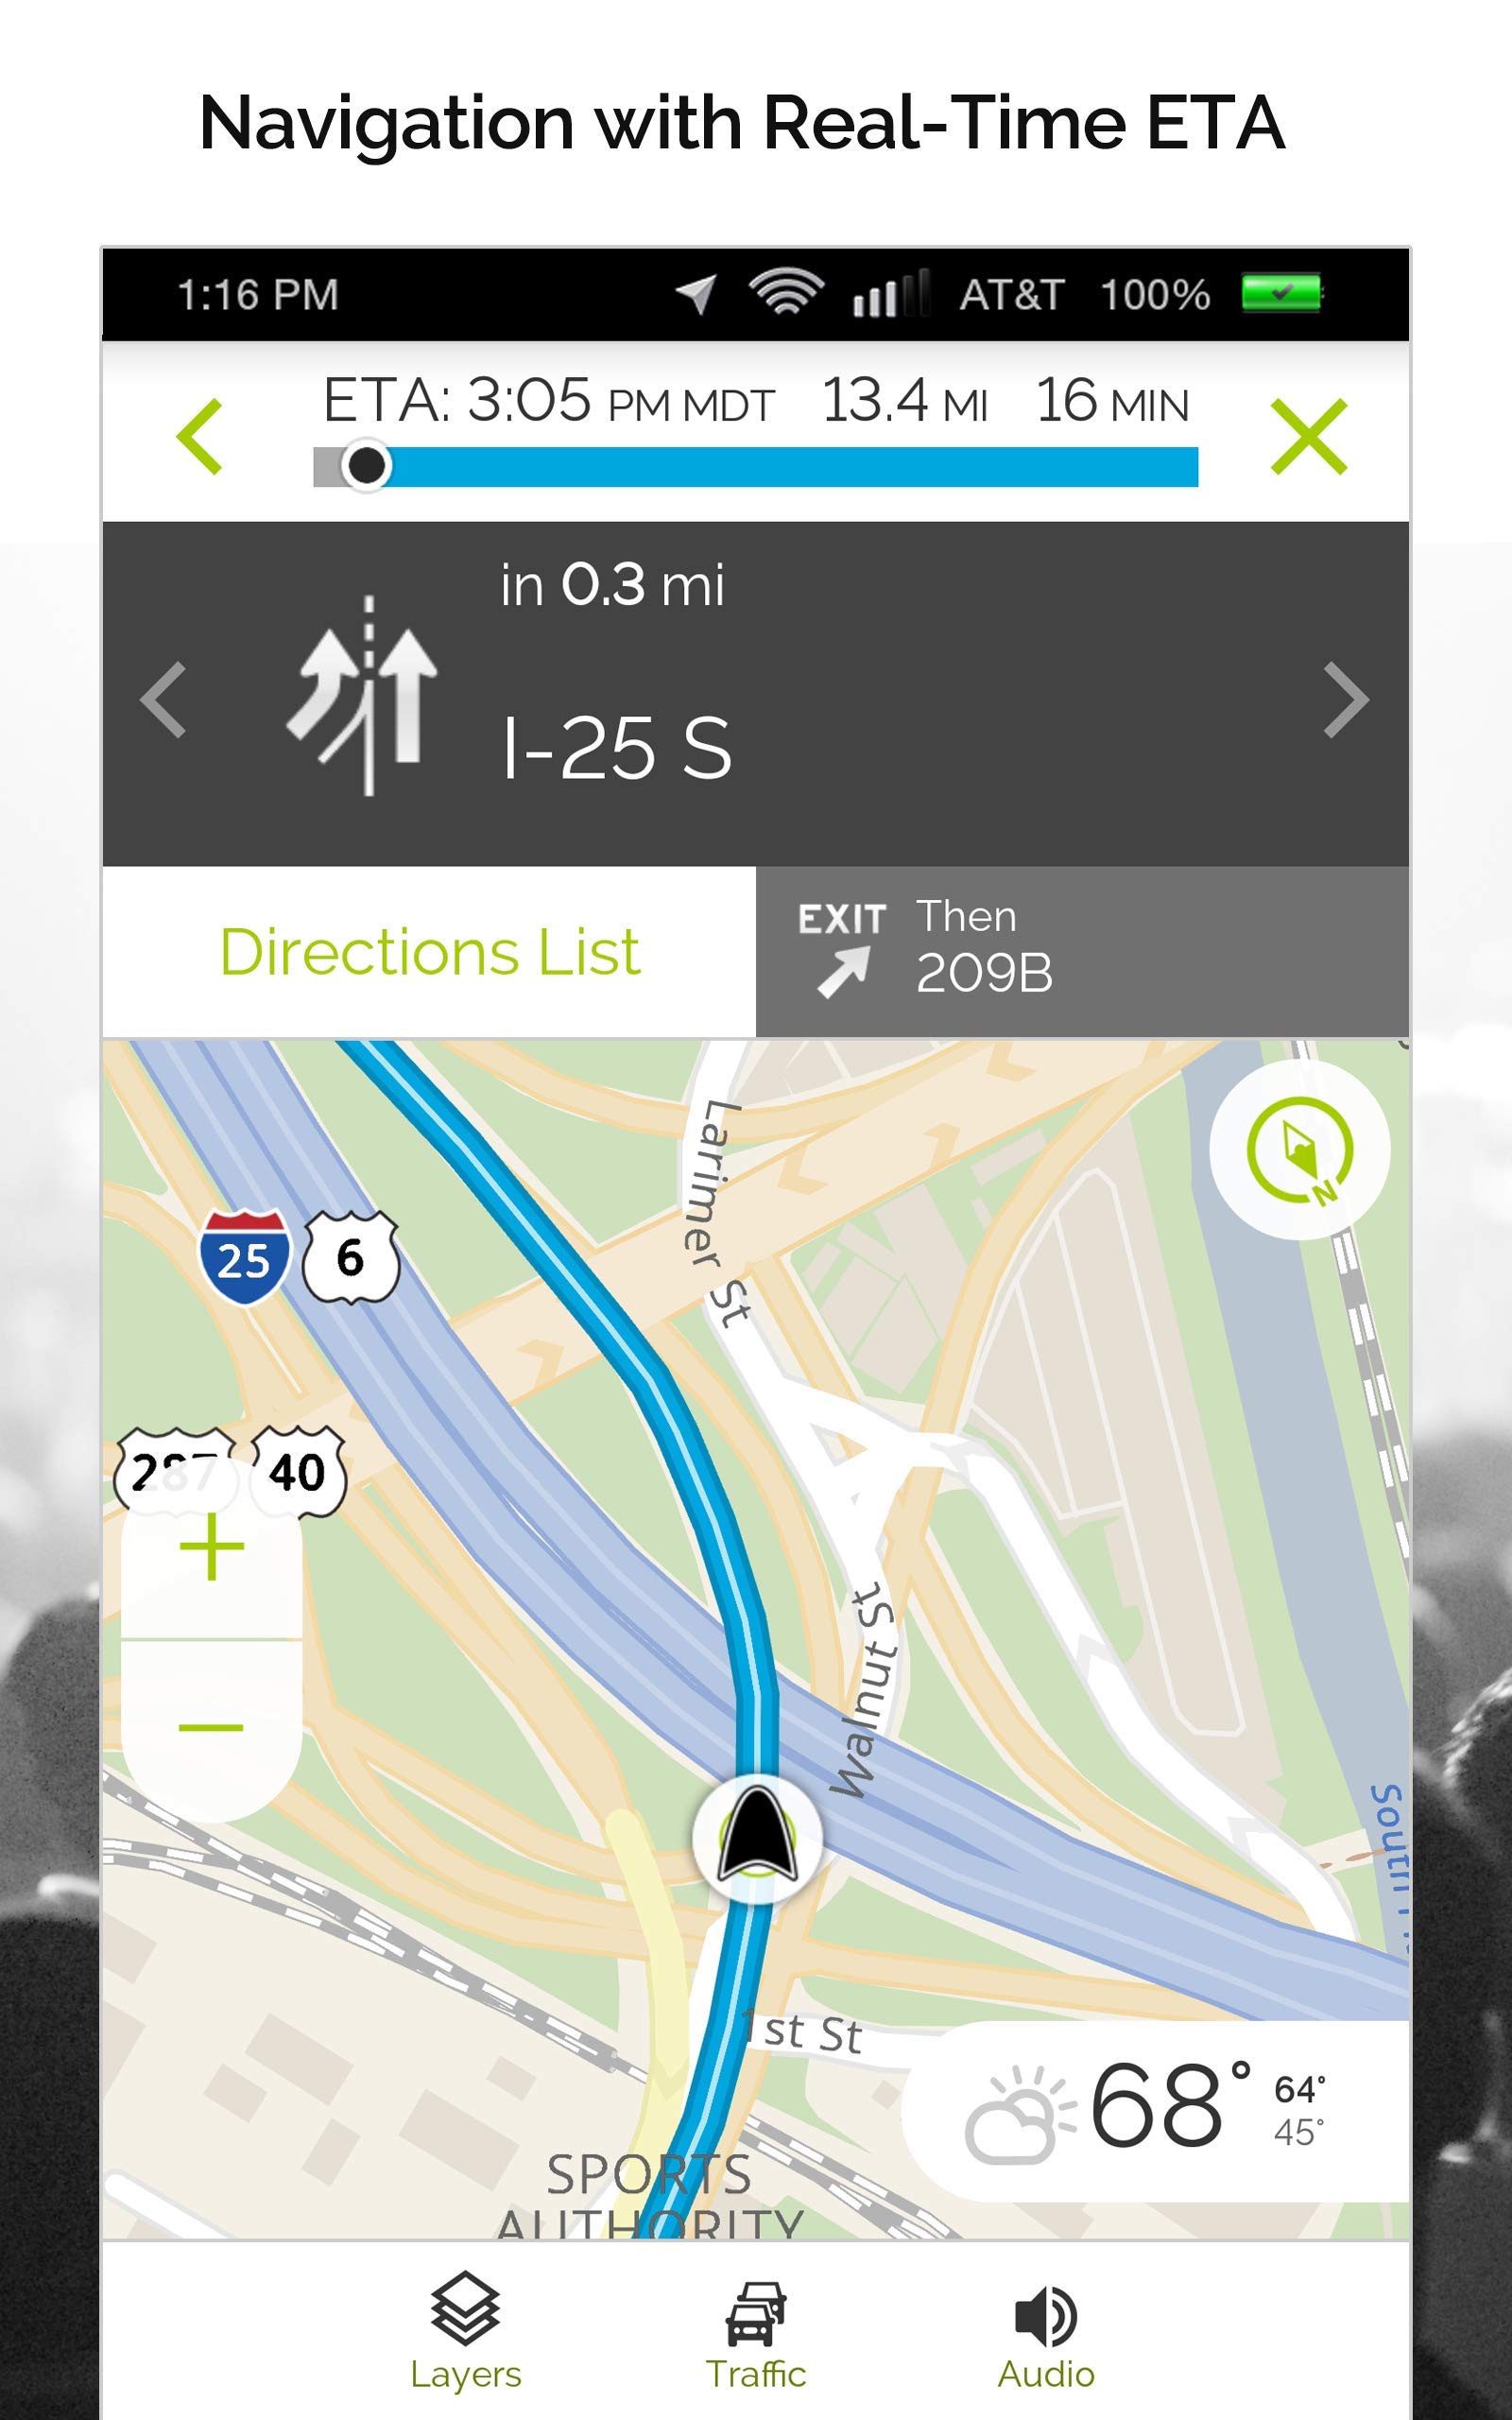 Consider using MapQuest for detailed driving directions and maps.
Explore HERE WeGo for offline maps and public transportation information.